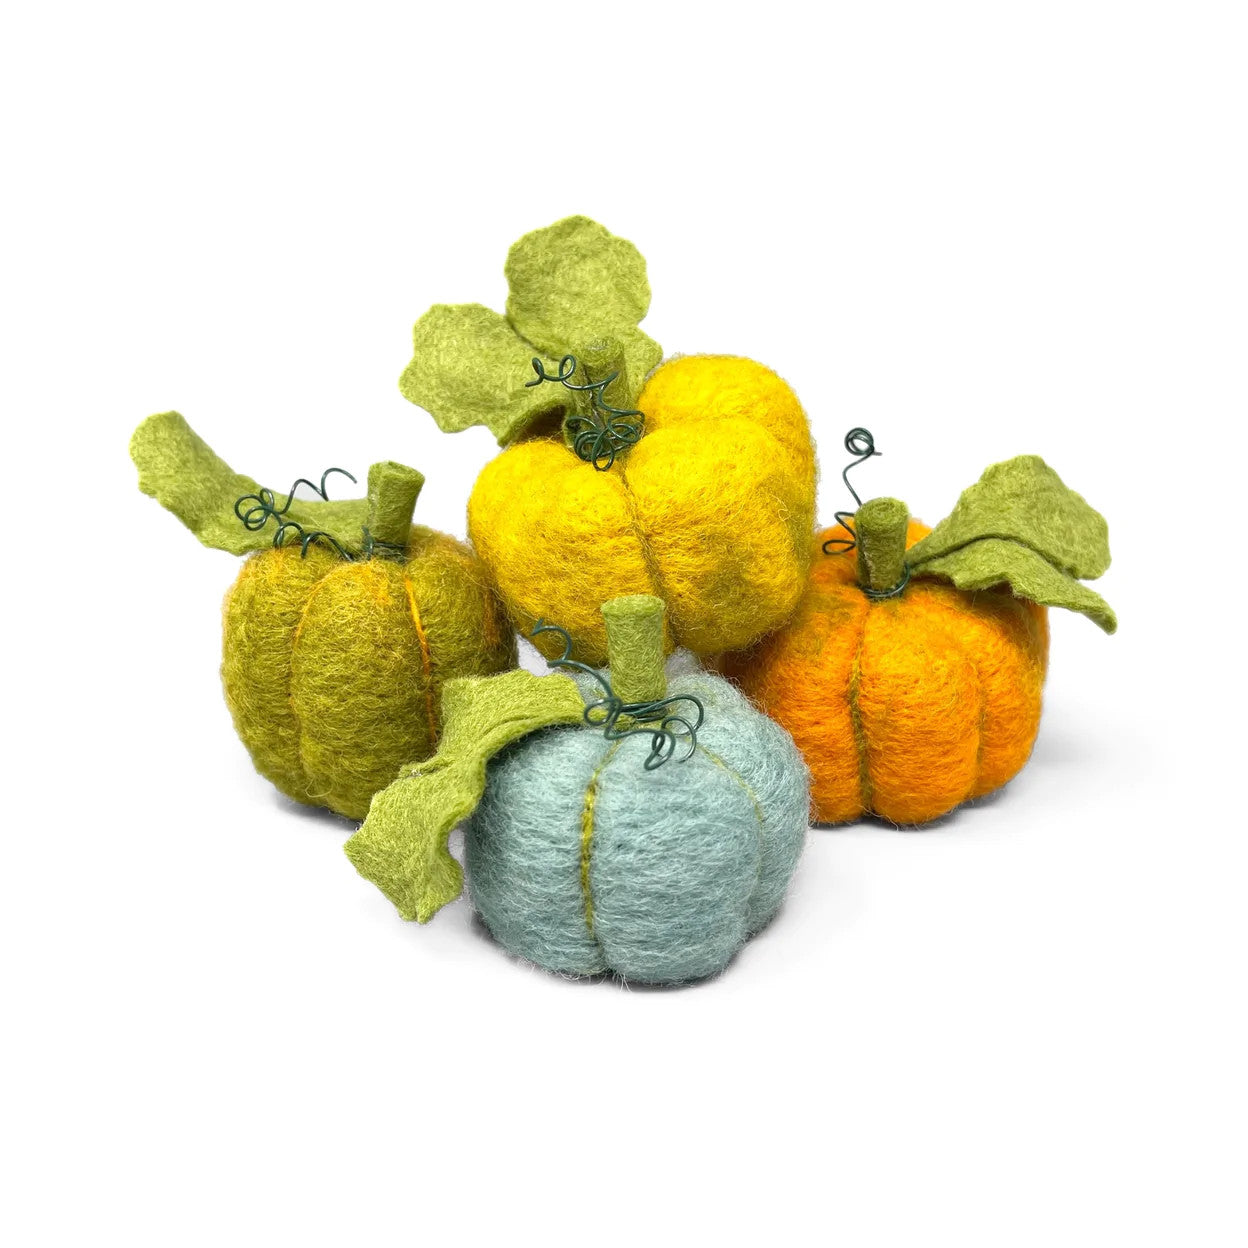 Woolly Pumpkins Felting Kit from The Crafty Kit Co. Made in Scotland